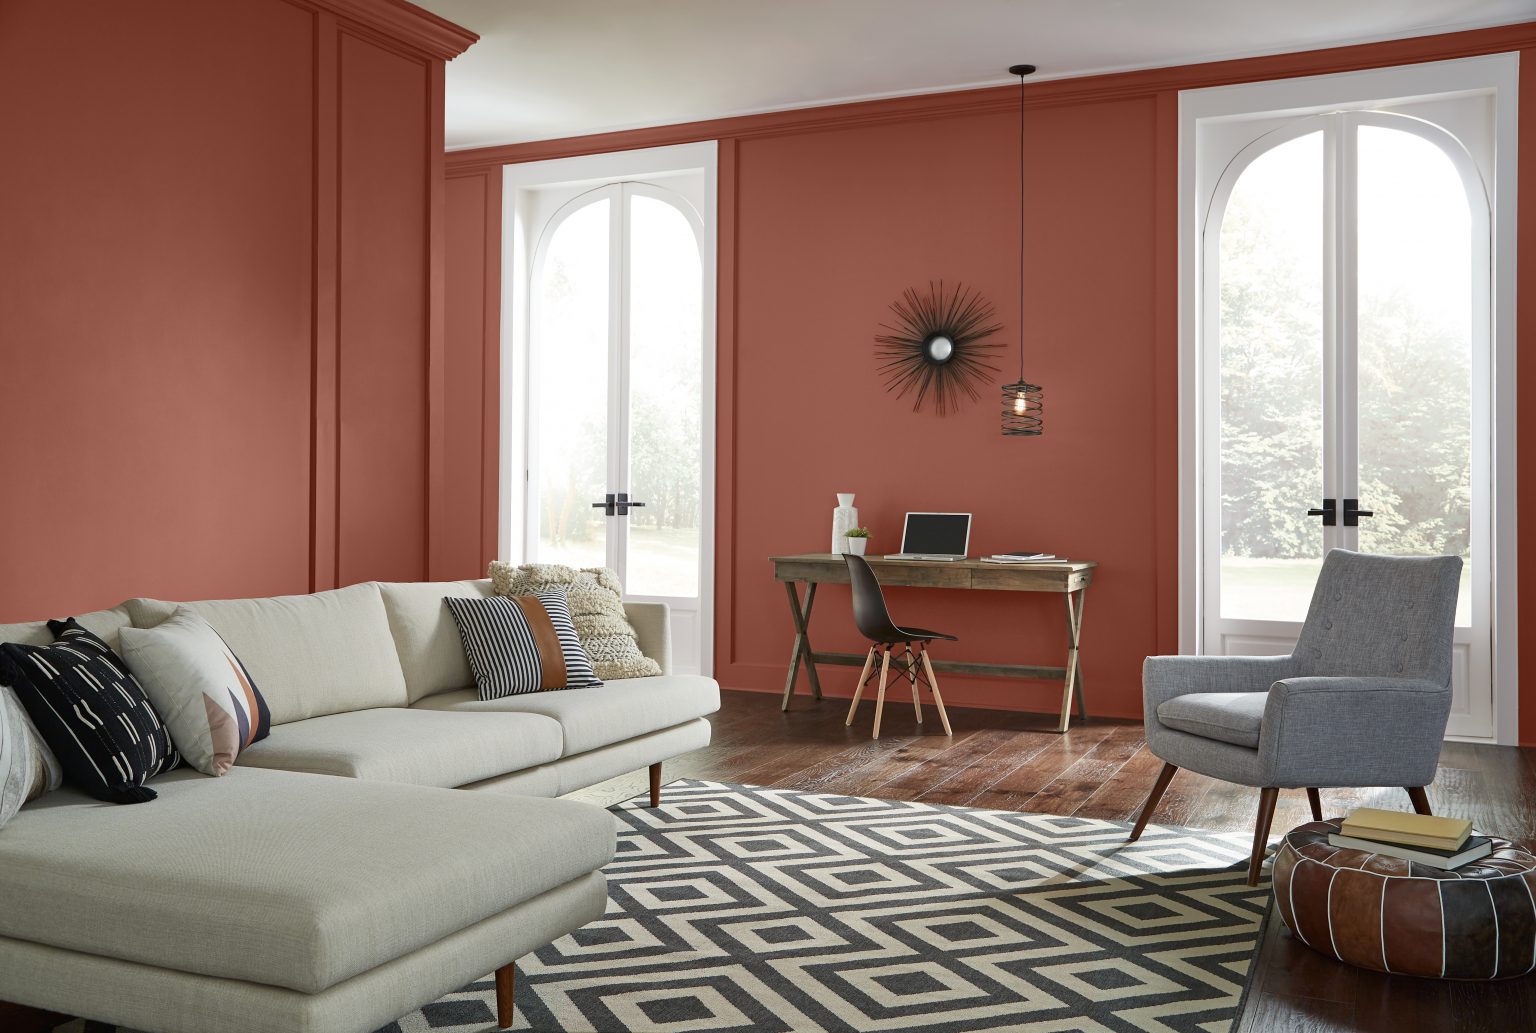 A living room with walls painted in a warm red, styled with a geometric rug and neutral furniture 